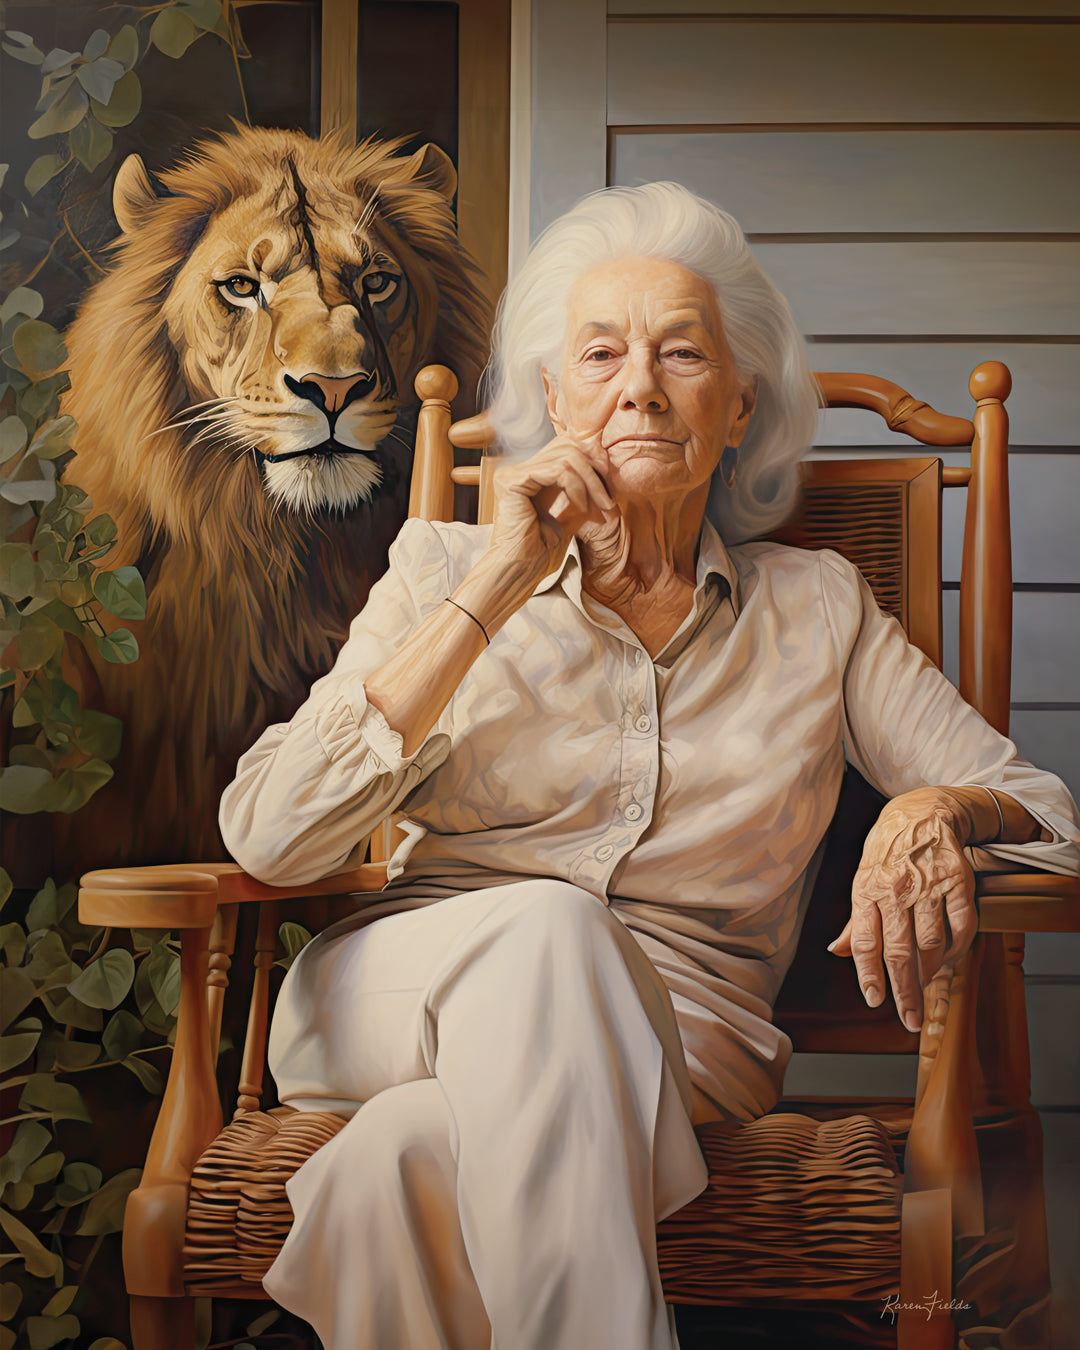 Image of woman on porch, sitting next to an adult male lion.